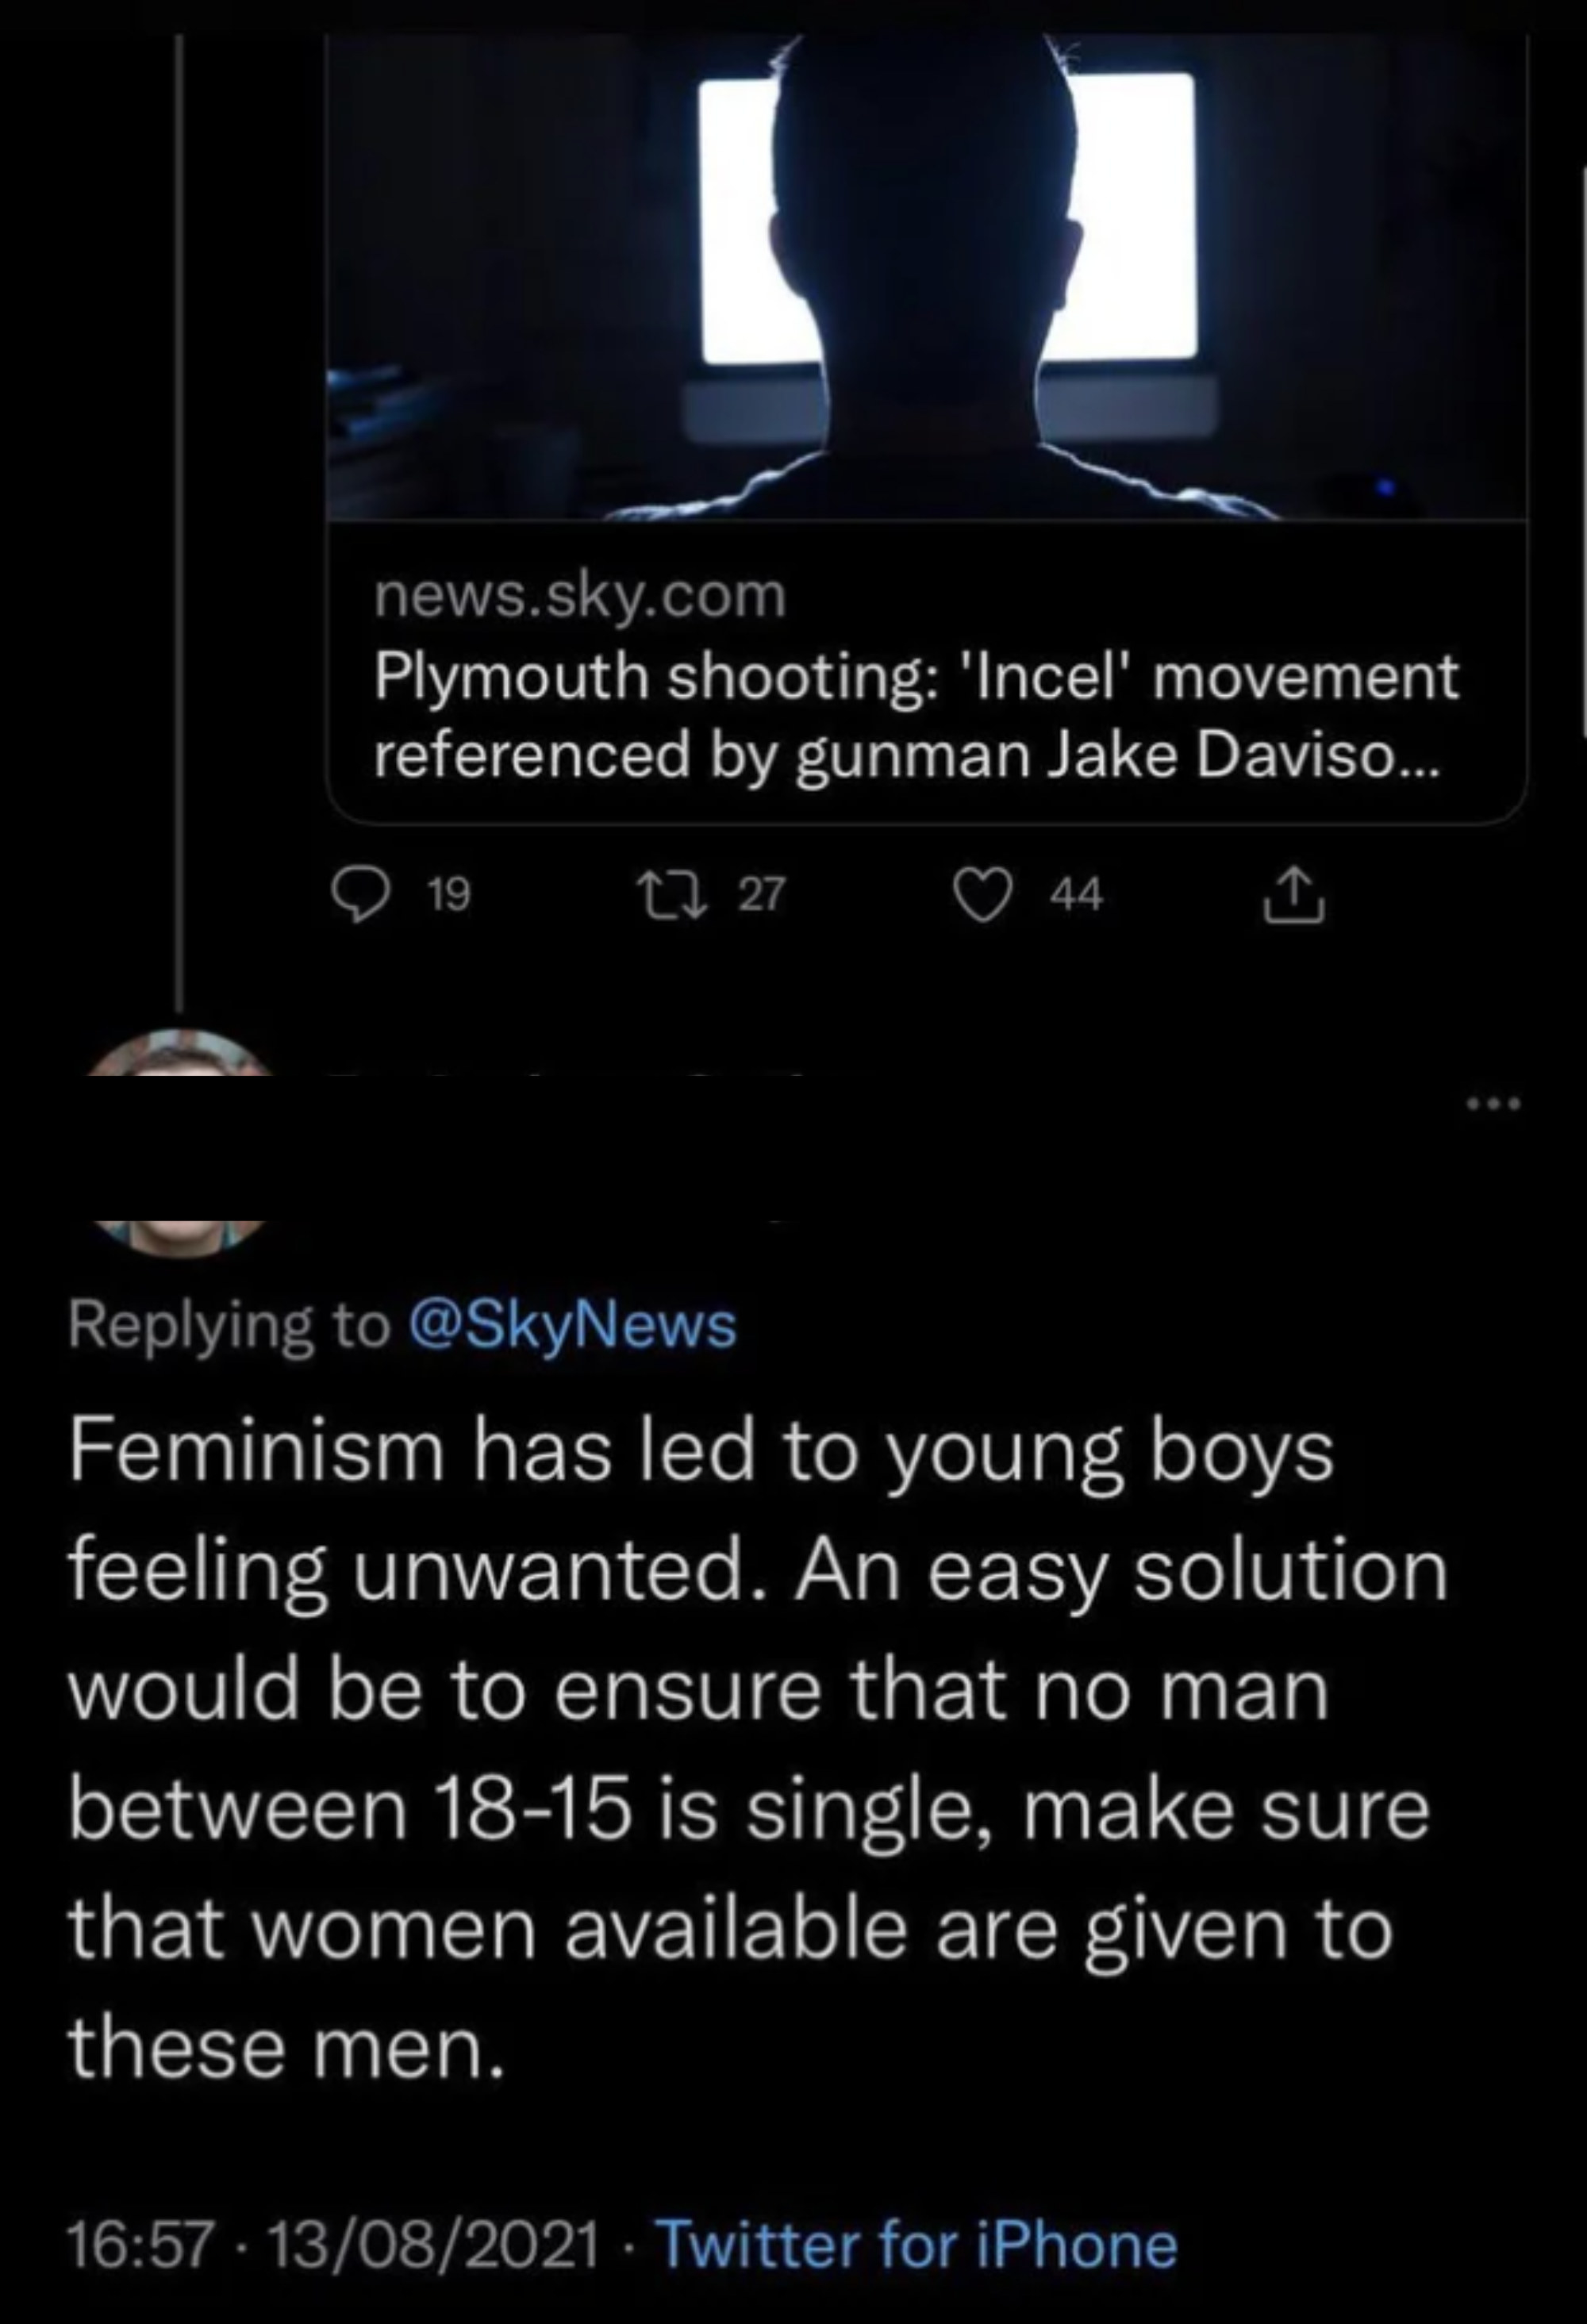 Post with a comment from someone saying, &quot;Feminism has led to young boys feeling unwanted. An easy solution would be to ensure that no man between 18-15 is single, make sure that women available are given to these men.&quot;